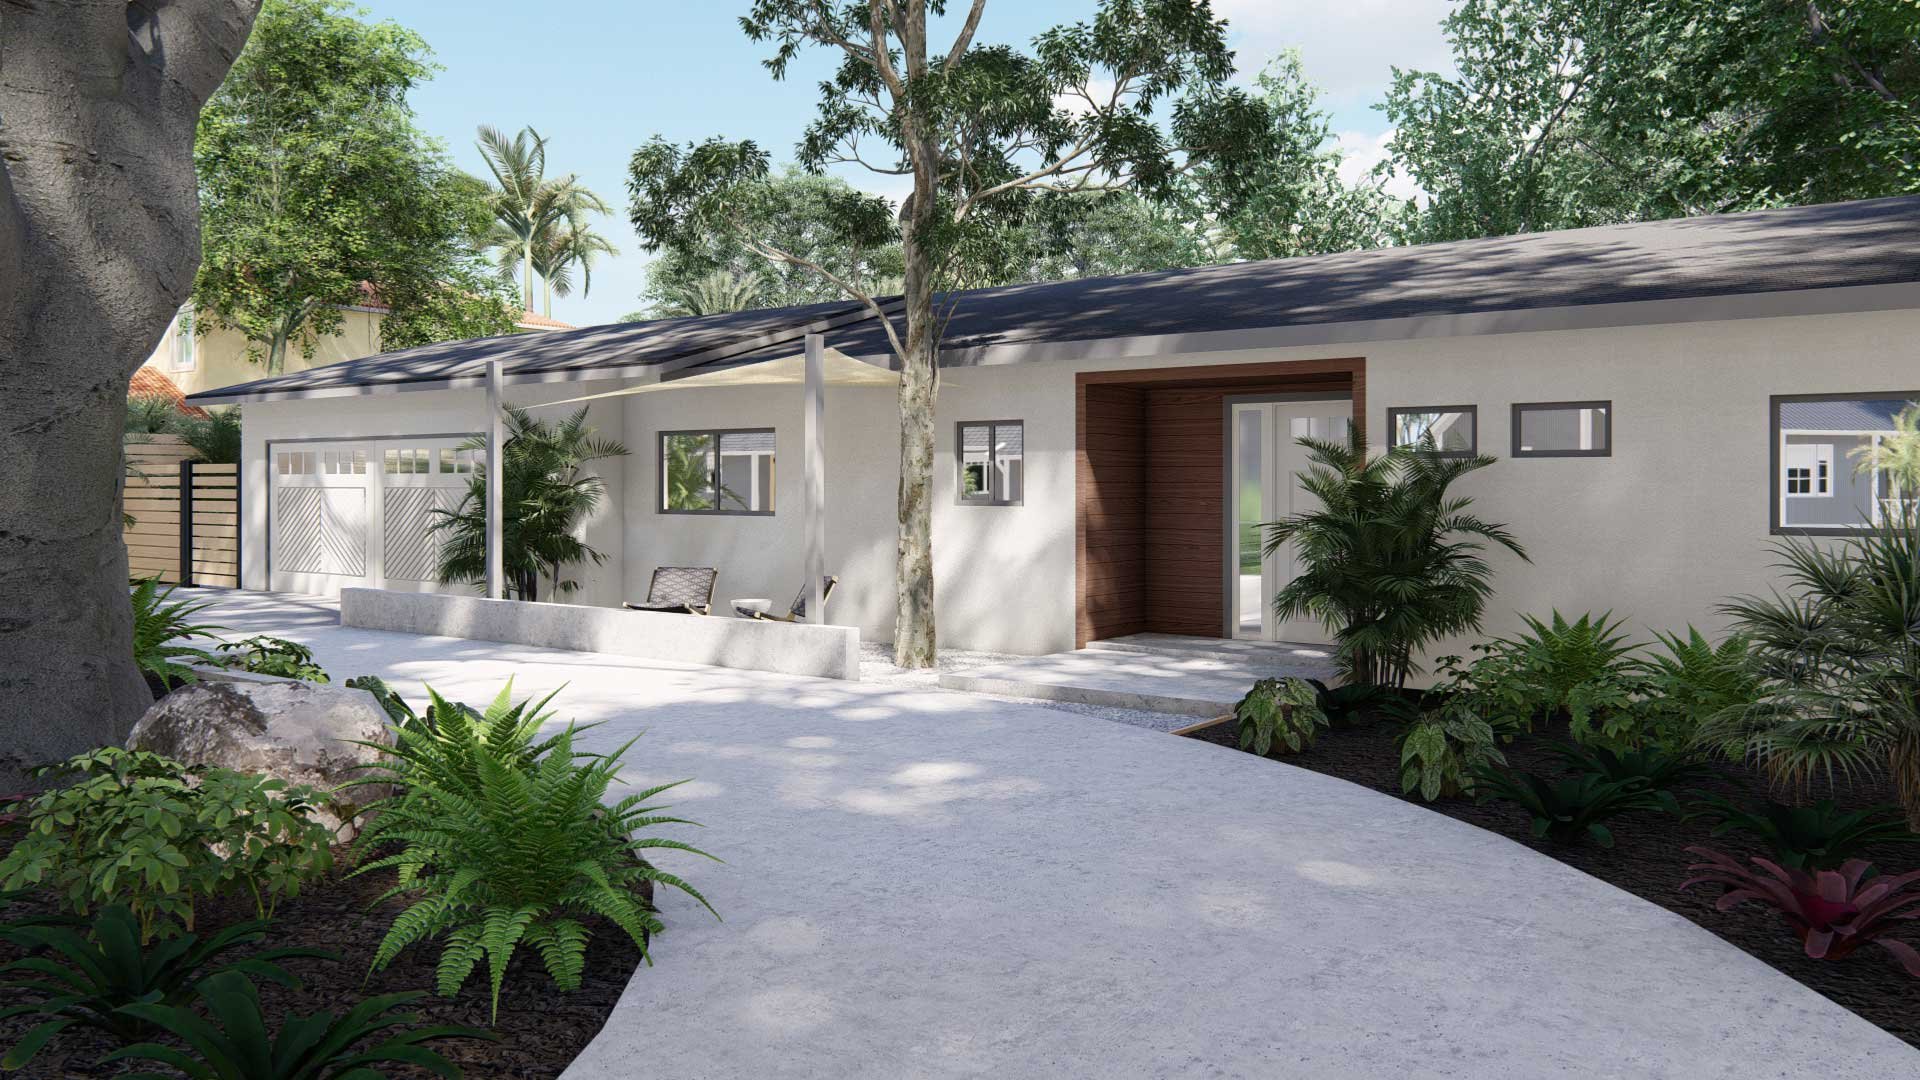 Front yard with curved driveway with lush tropical plantings and small porch area with seats